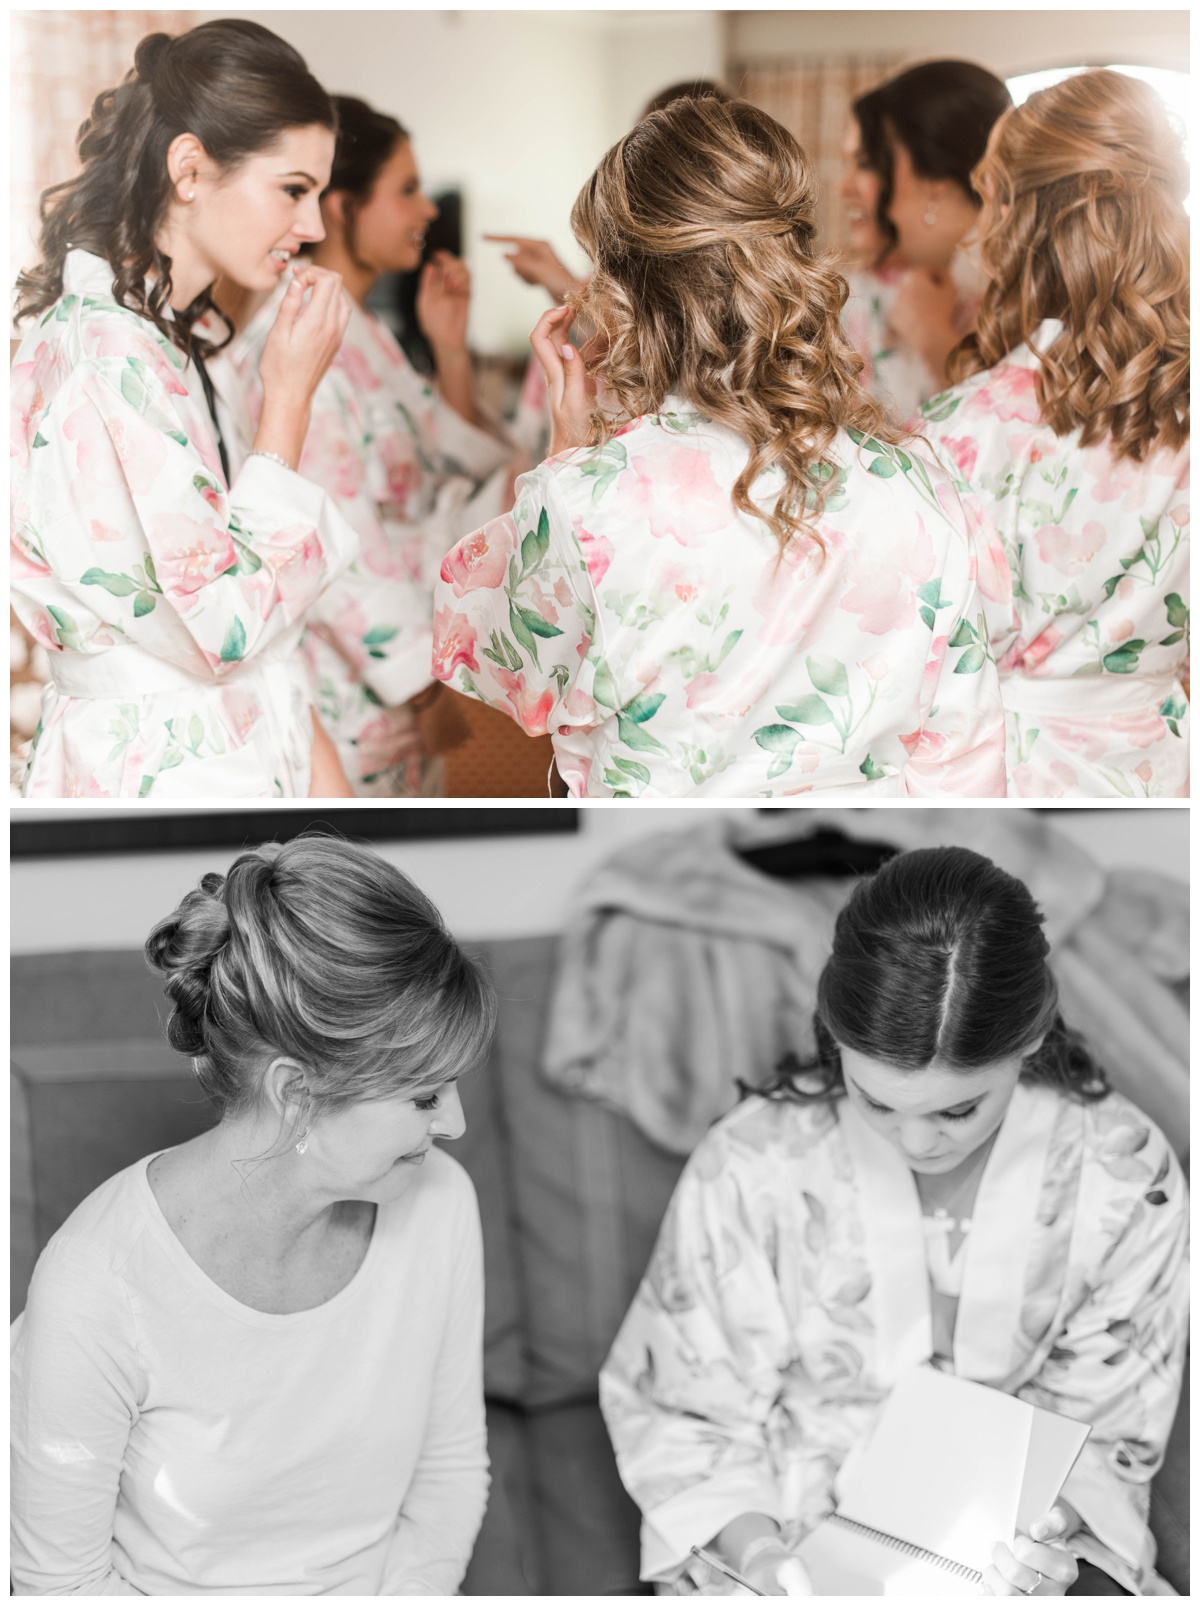 Naval Academy Fall Wedding in Annapolis, MD bridesmaids and getting ready